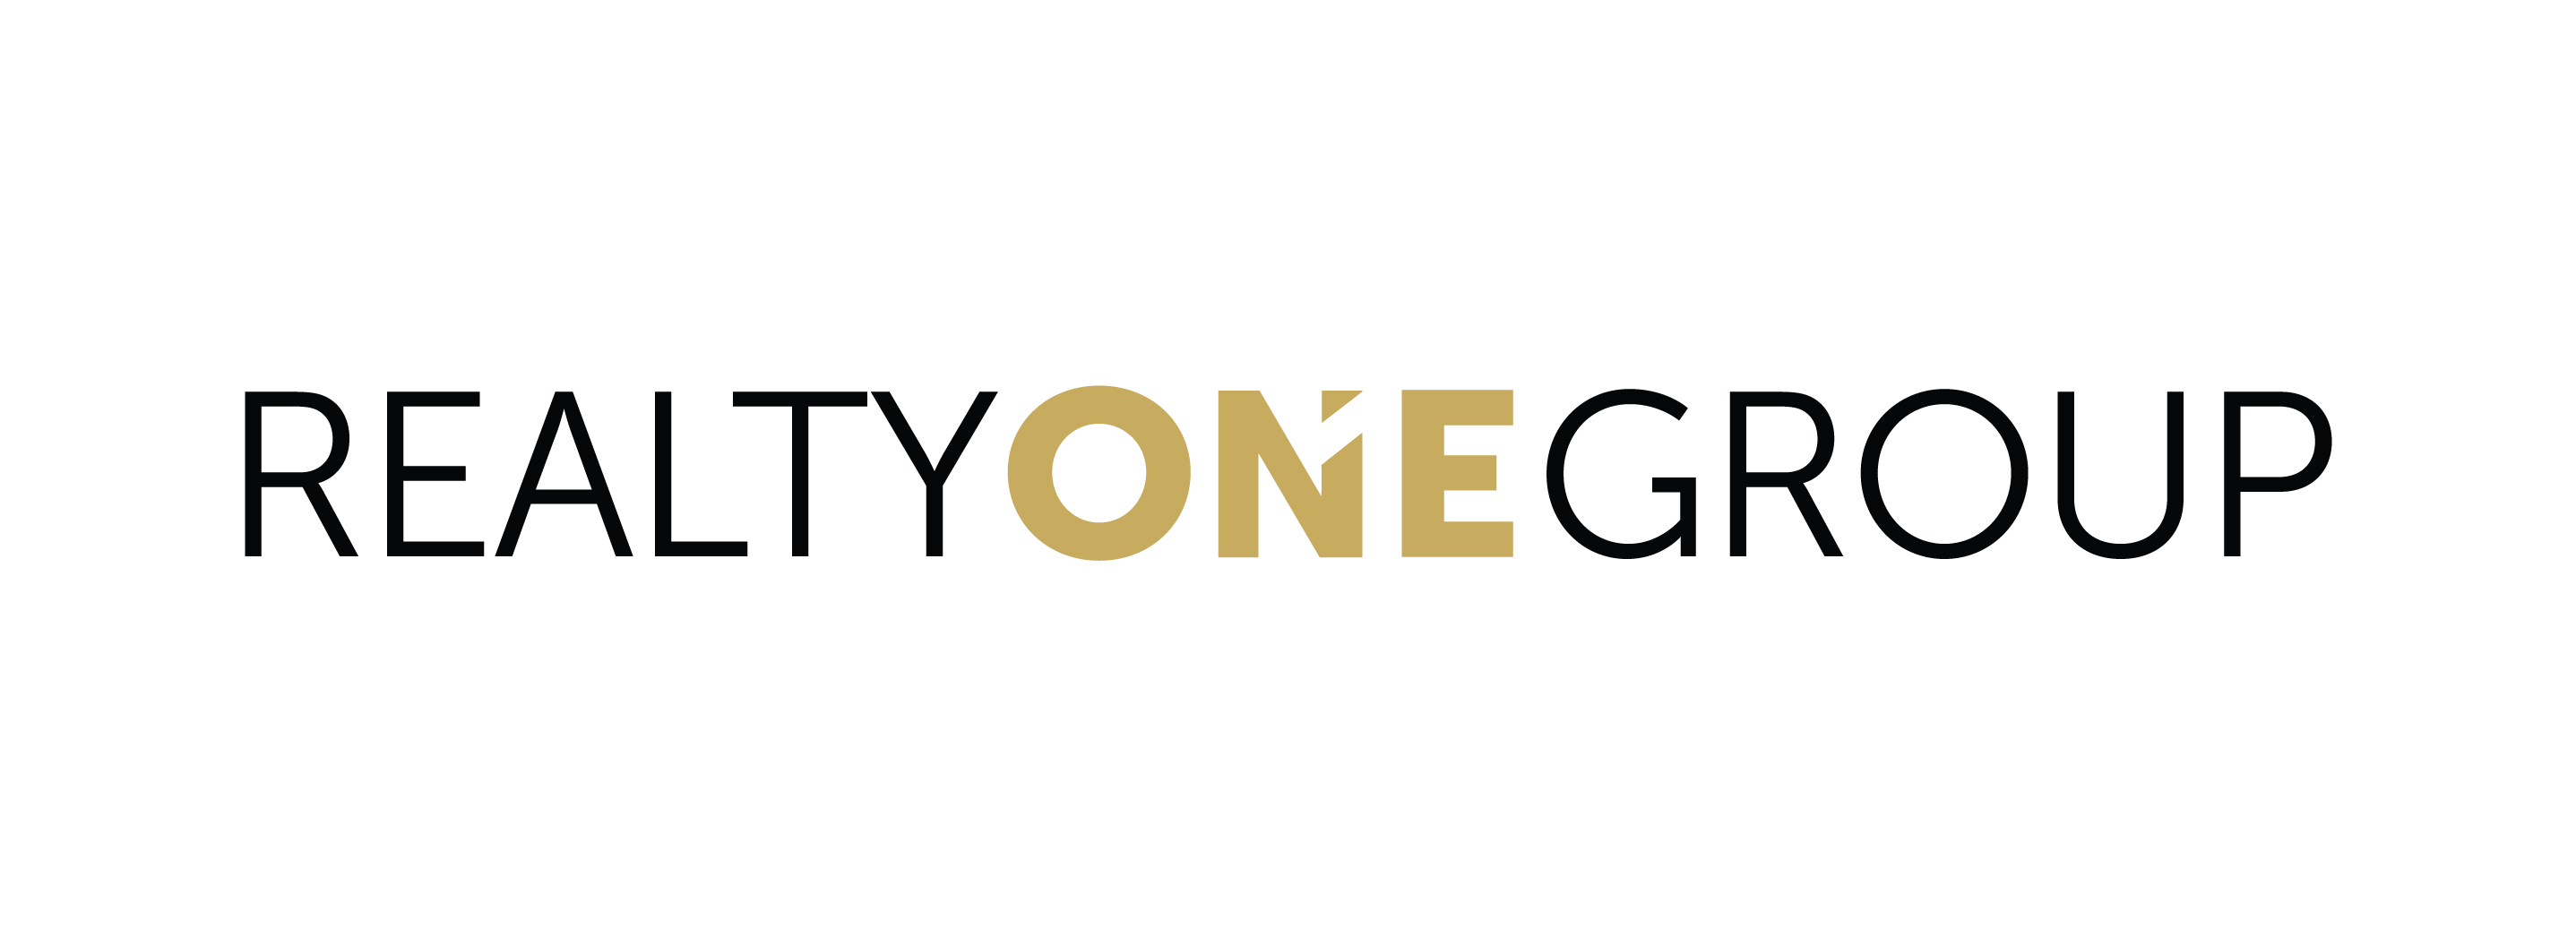 Realty ONE Group Hits Big Milestones in 2018, Predicts Even Stronger